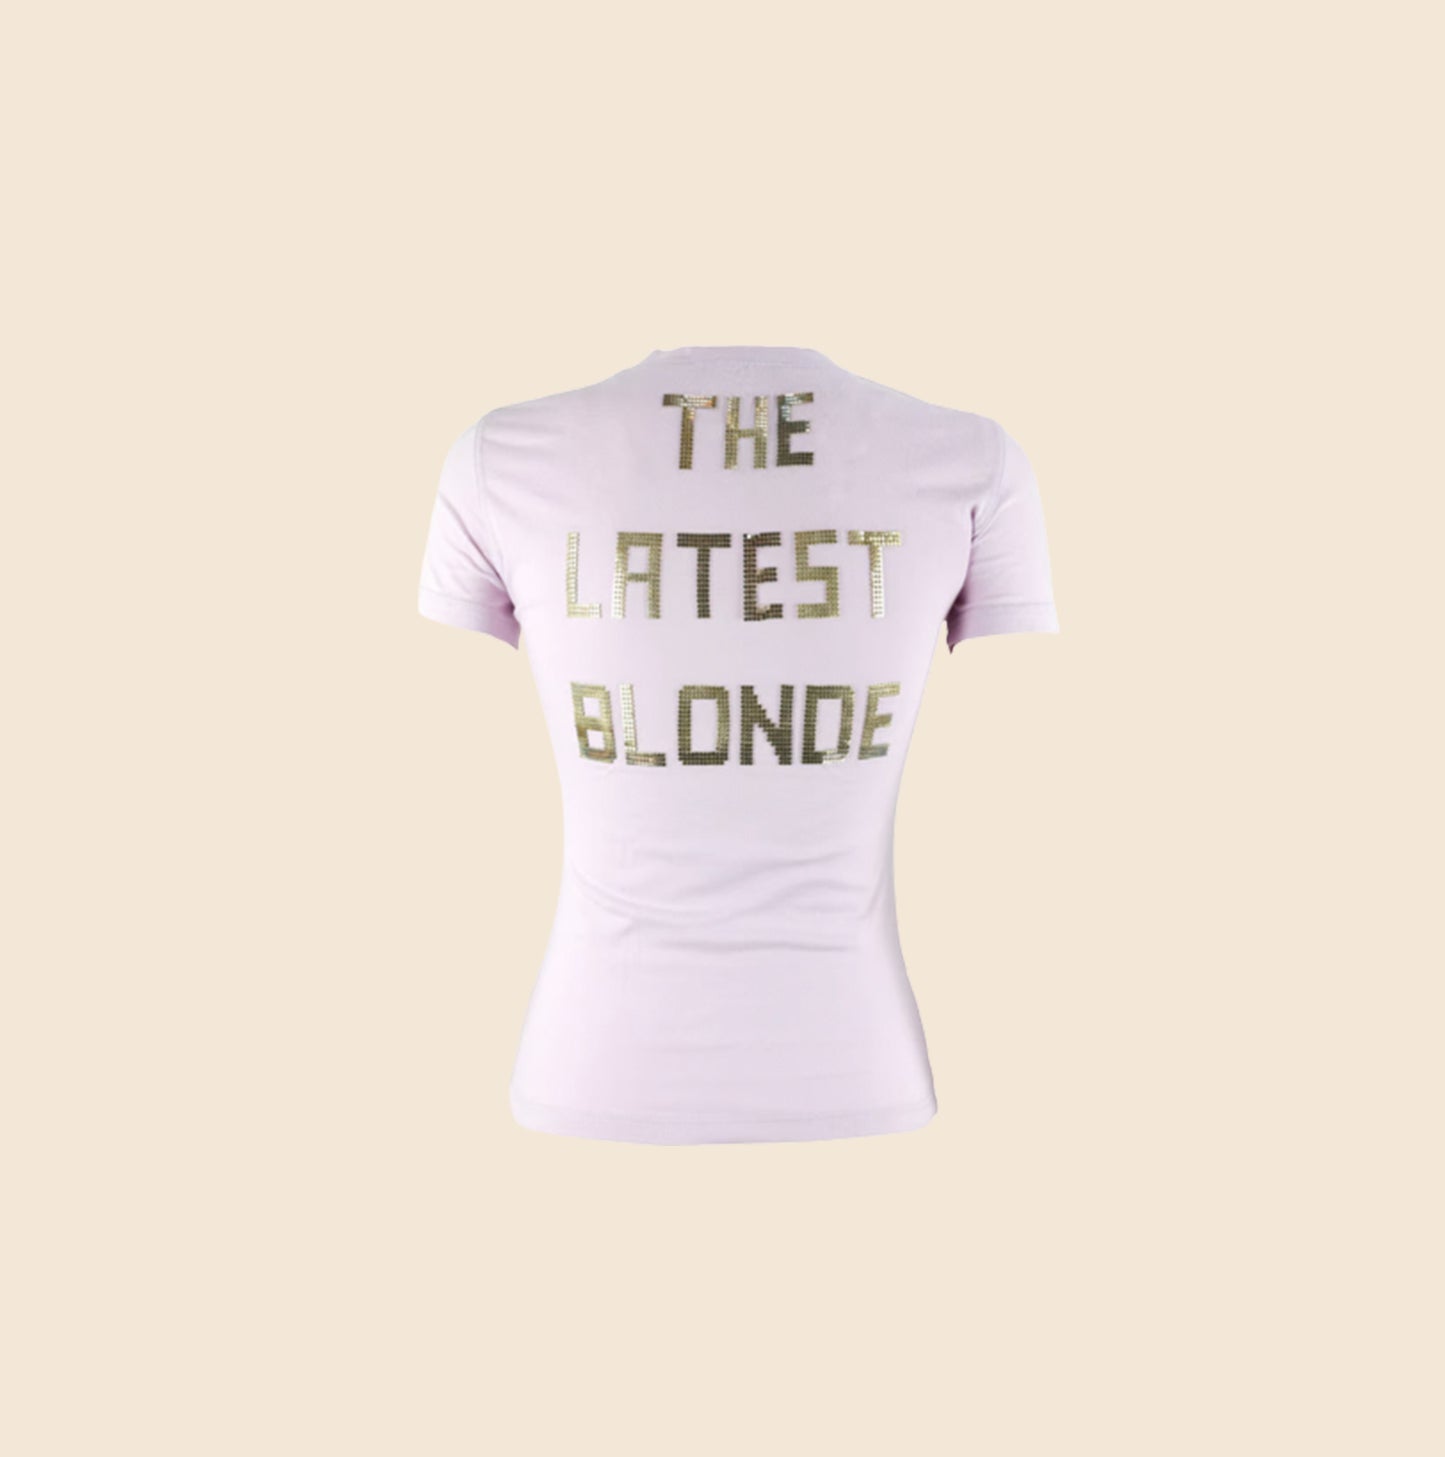 CHRISTIAN DIOR 2000s "J'ADORE DIOR" & "THE LATEST BLONDE" T-SHIRT